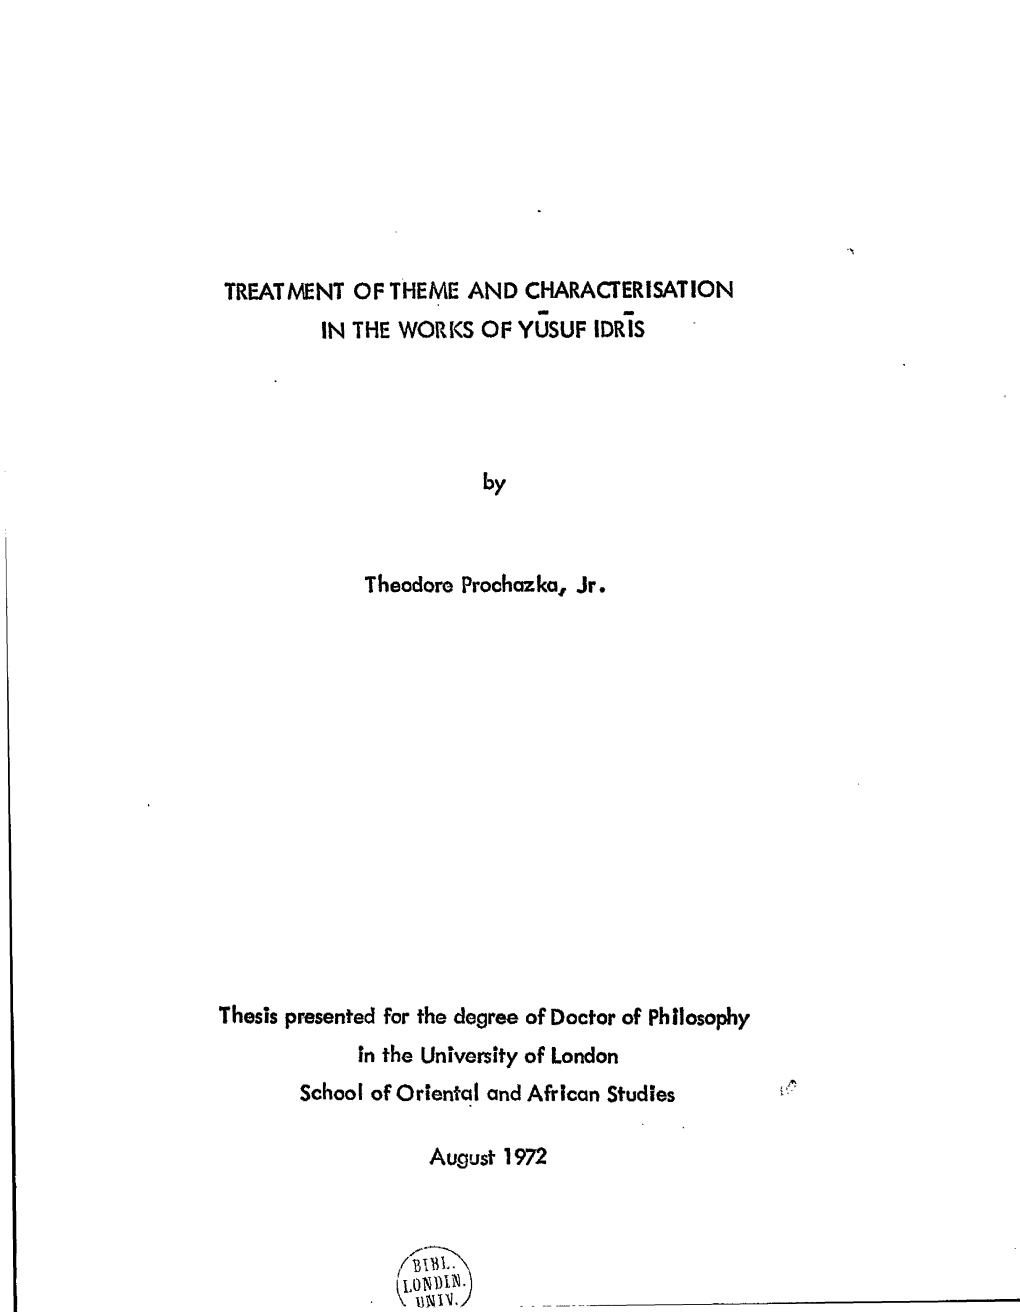 TREATMENT of THEME and CHARACTERISATION in the WORKS of YUSUF Idrts by Theodore Prochazka, Jr. Thesis Presented for the Degree O